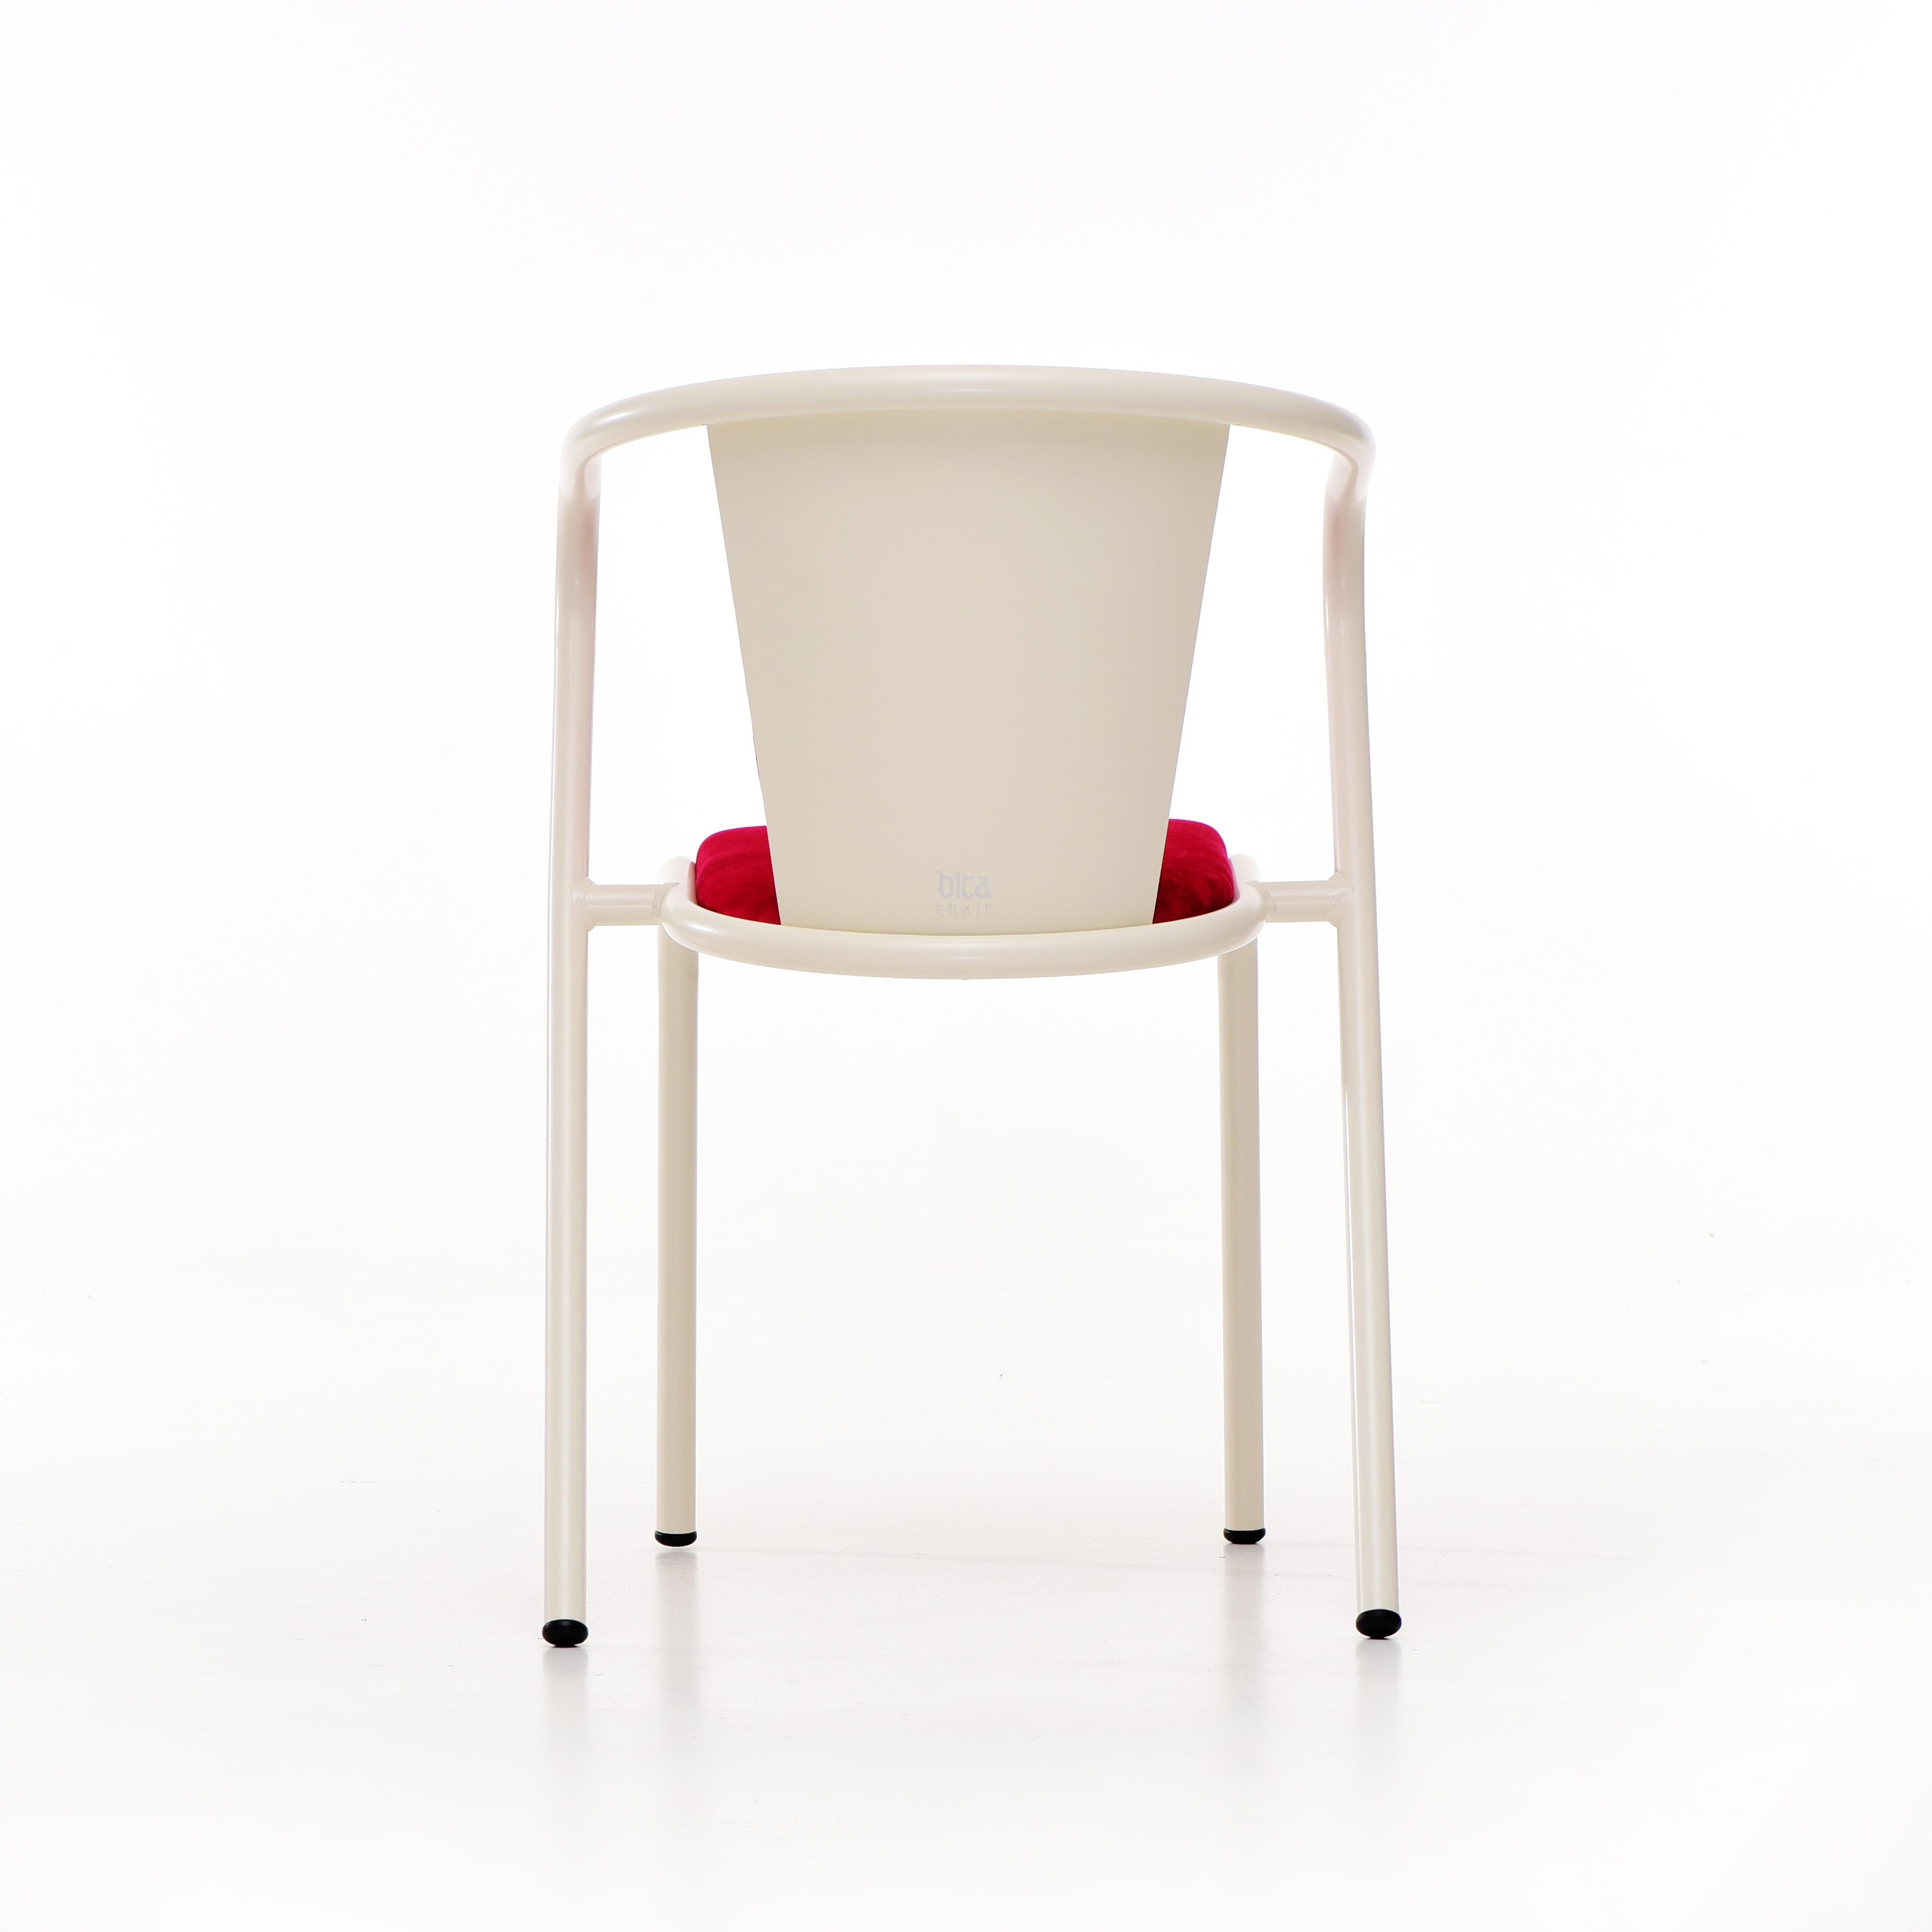 BICAchair Modern Steel Armchair Oyster White, Upholstery in Soft Velvet In New Condition For Sale In Agualva-Cacém, PT